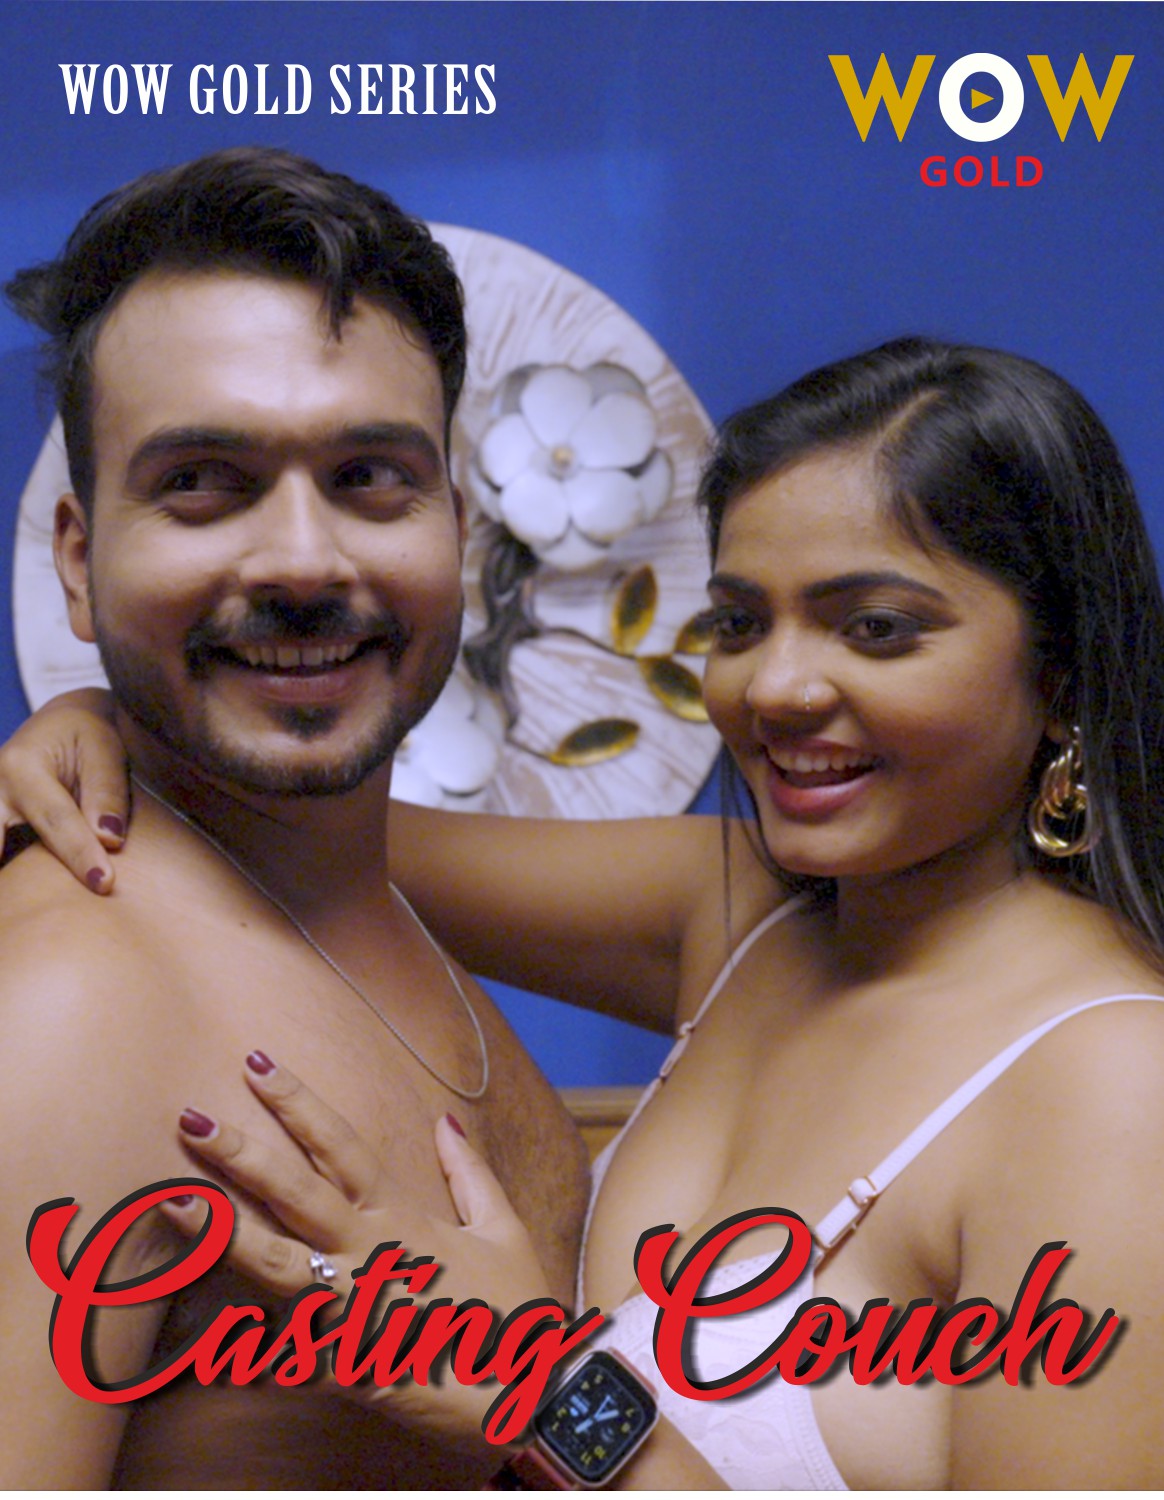 Casting Couch 2023 WowGold S01 Ep1-2 Hindi Web Series 720p HDRip 500MB Download